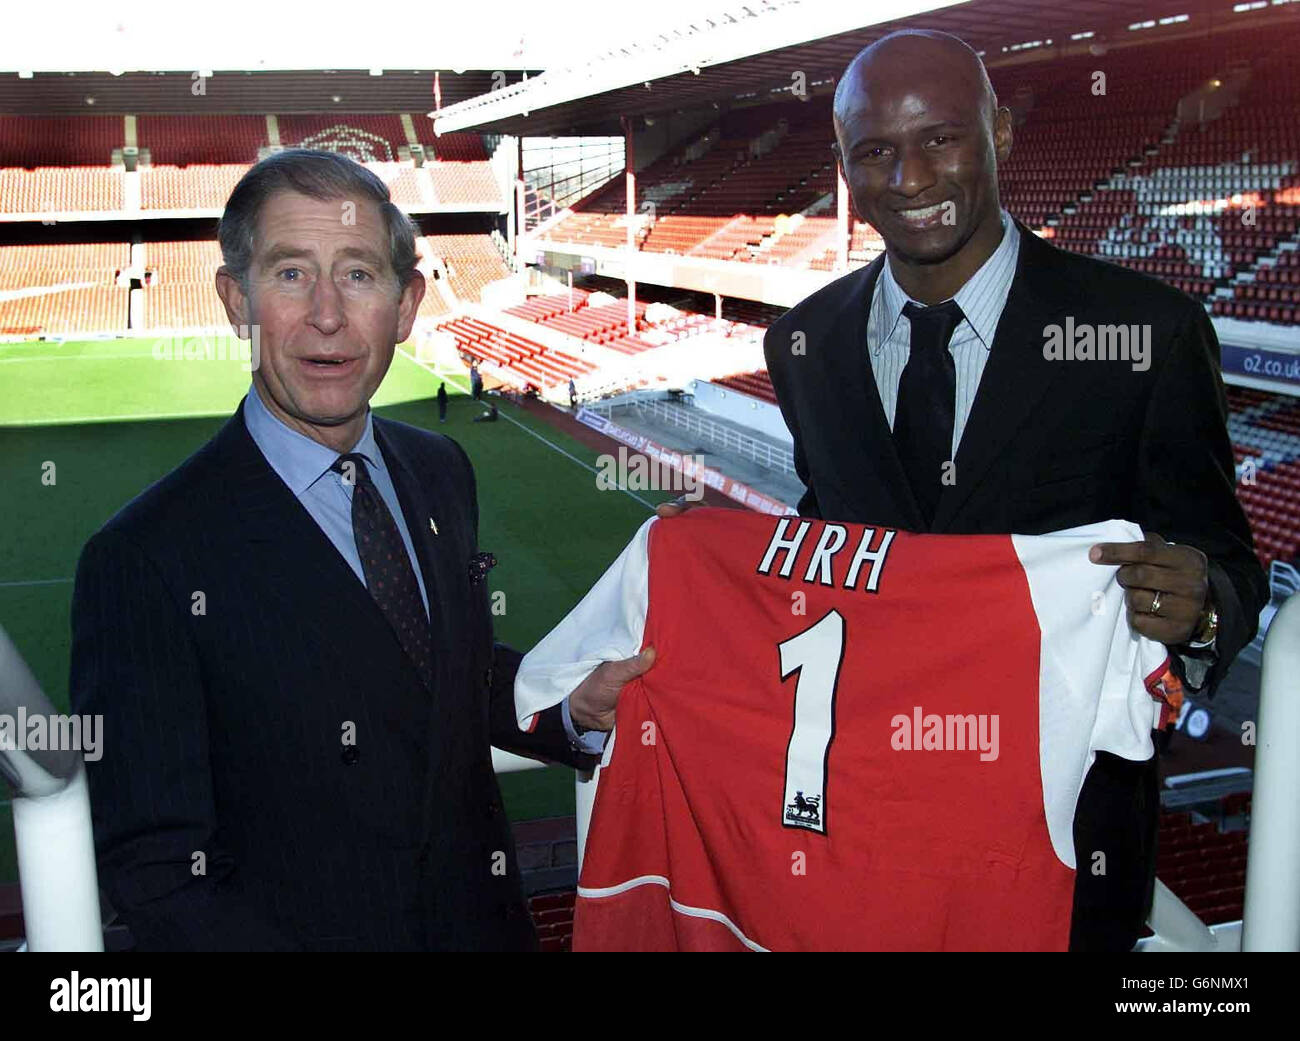 The Prince of Wales (left) is presented with an Arsenal shirt by club captain Patrick Vieira as he visits Arsenal FC's Highbury stadium in north London, to celebrate the sixth anniversary of The Prince's Trust Football Initiative. The Prince's Trust Football Initiative uses the appeal of football to motivate youngsters aged 16-25, and is funded by the FA Premier League, the Football Foundation and the Professional Footballers Association. Stock Photo